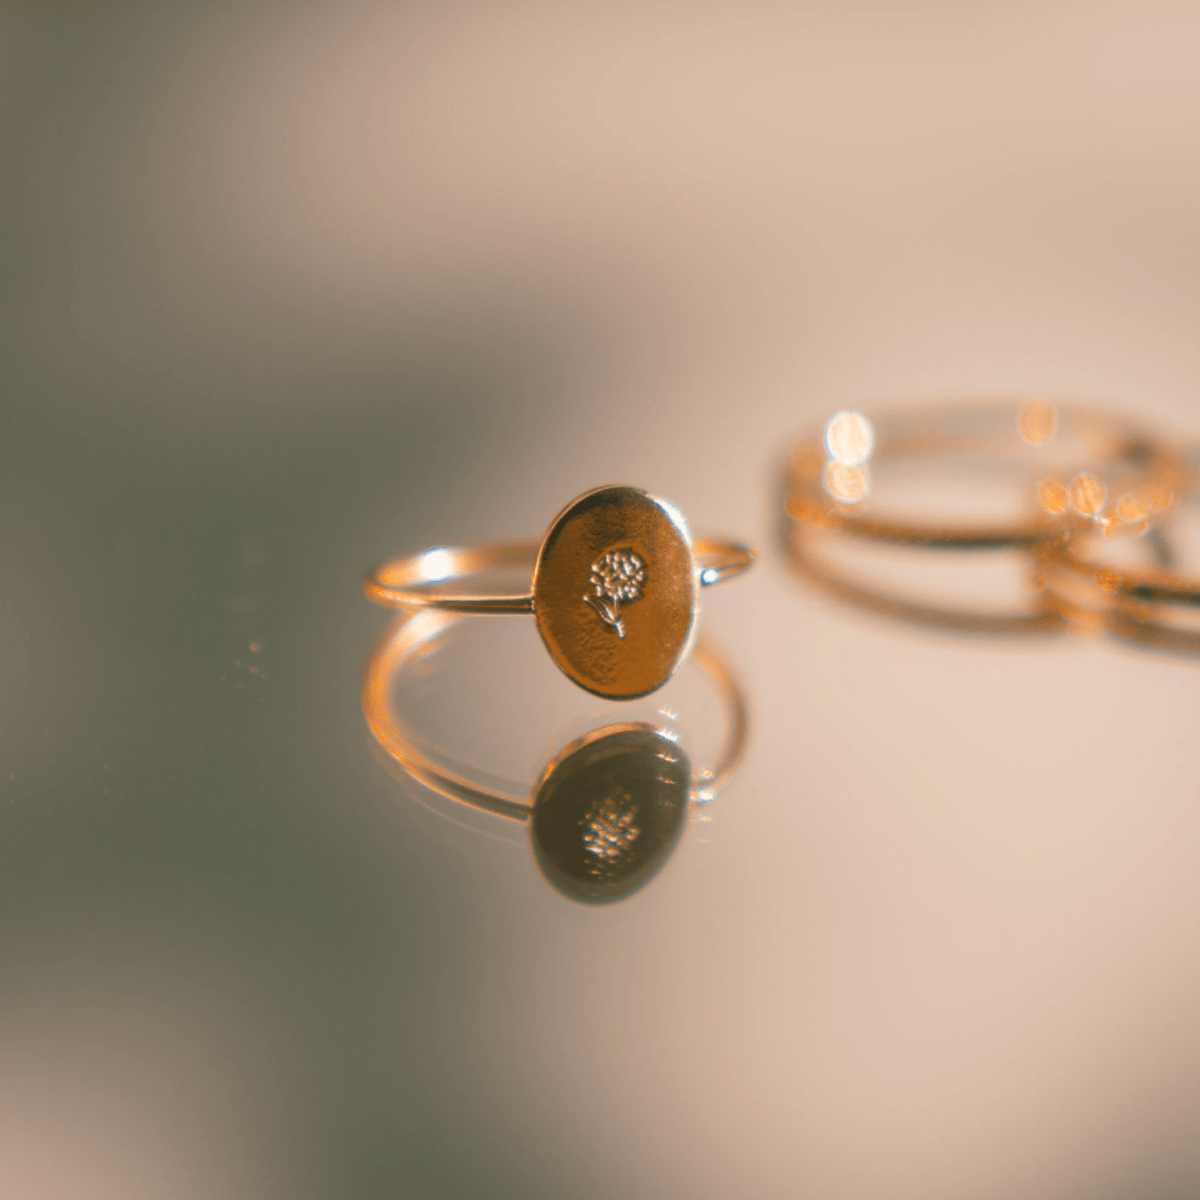 Oval Customized Ring - Initial or Birth Flower Ring